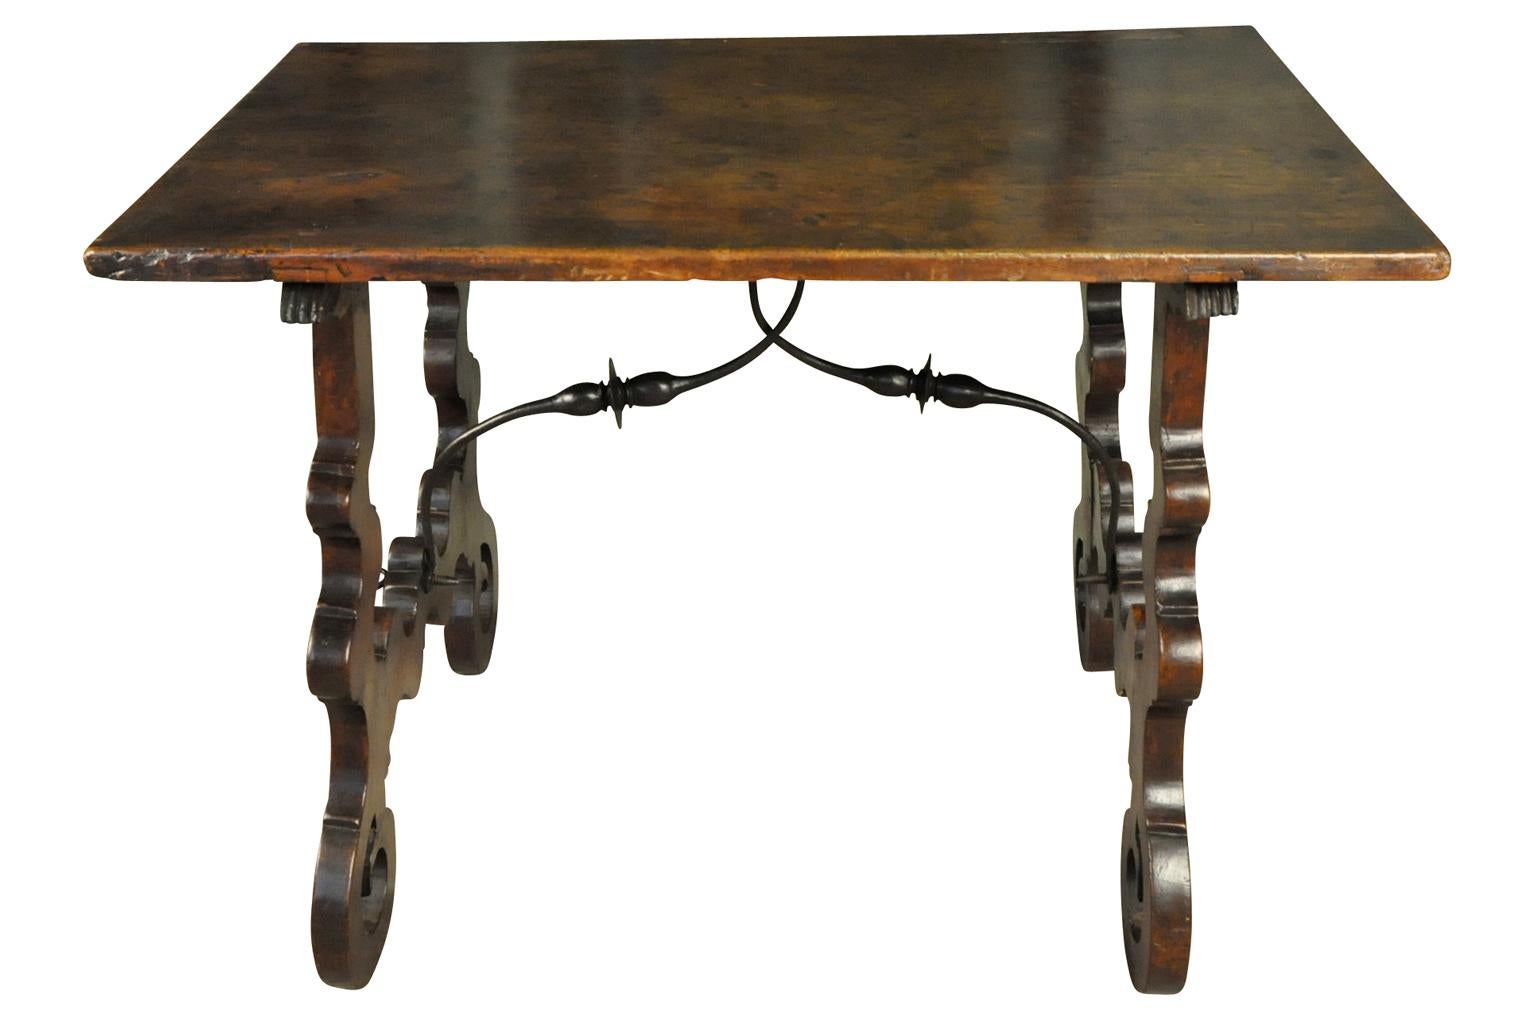 An outstanding 18th century side table from the Catalan region of Spain. Beautifully and soundly constructed from stunning walnut, hand forged iron stretchers and classical lyre shaped legs. This table has a beautiful solid board top. Sensational